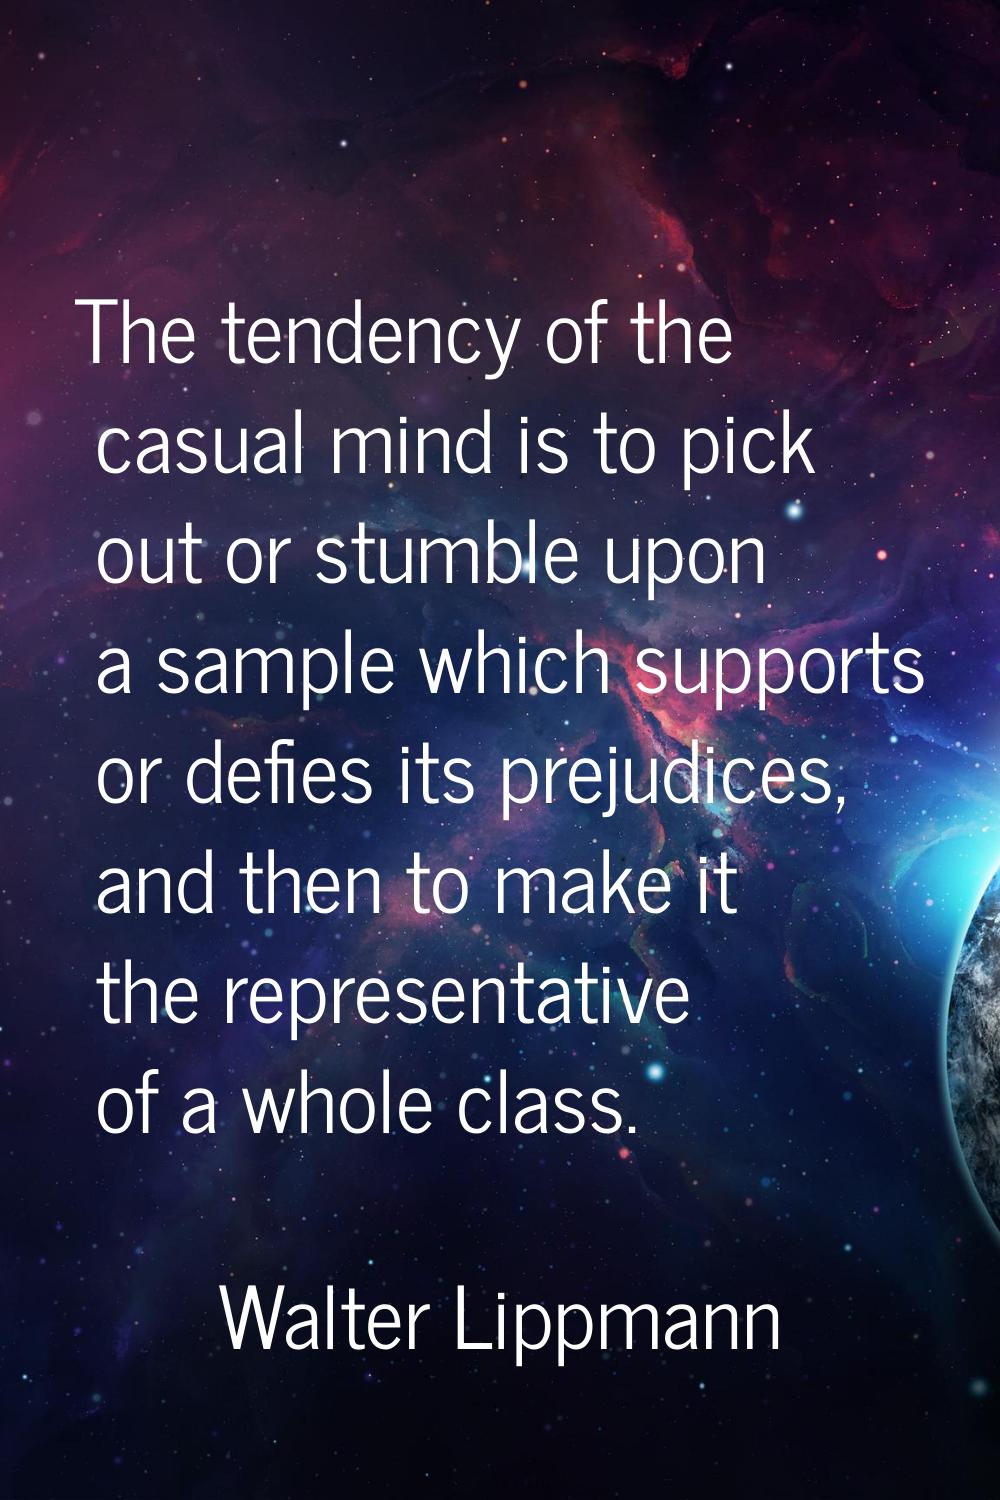 The tendency of the casual mind is to pick out or stumble upon a sample which supports or defies it